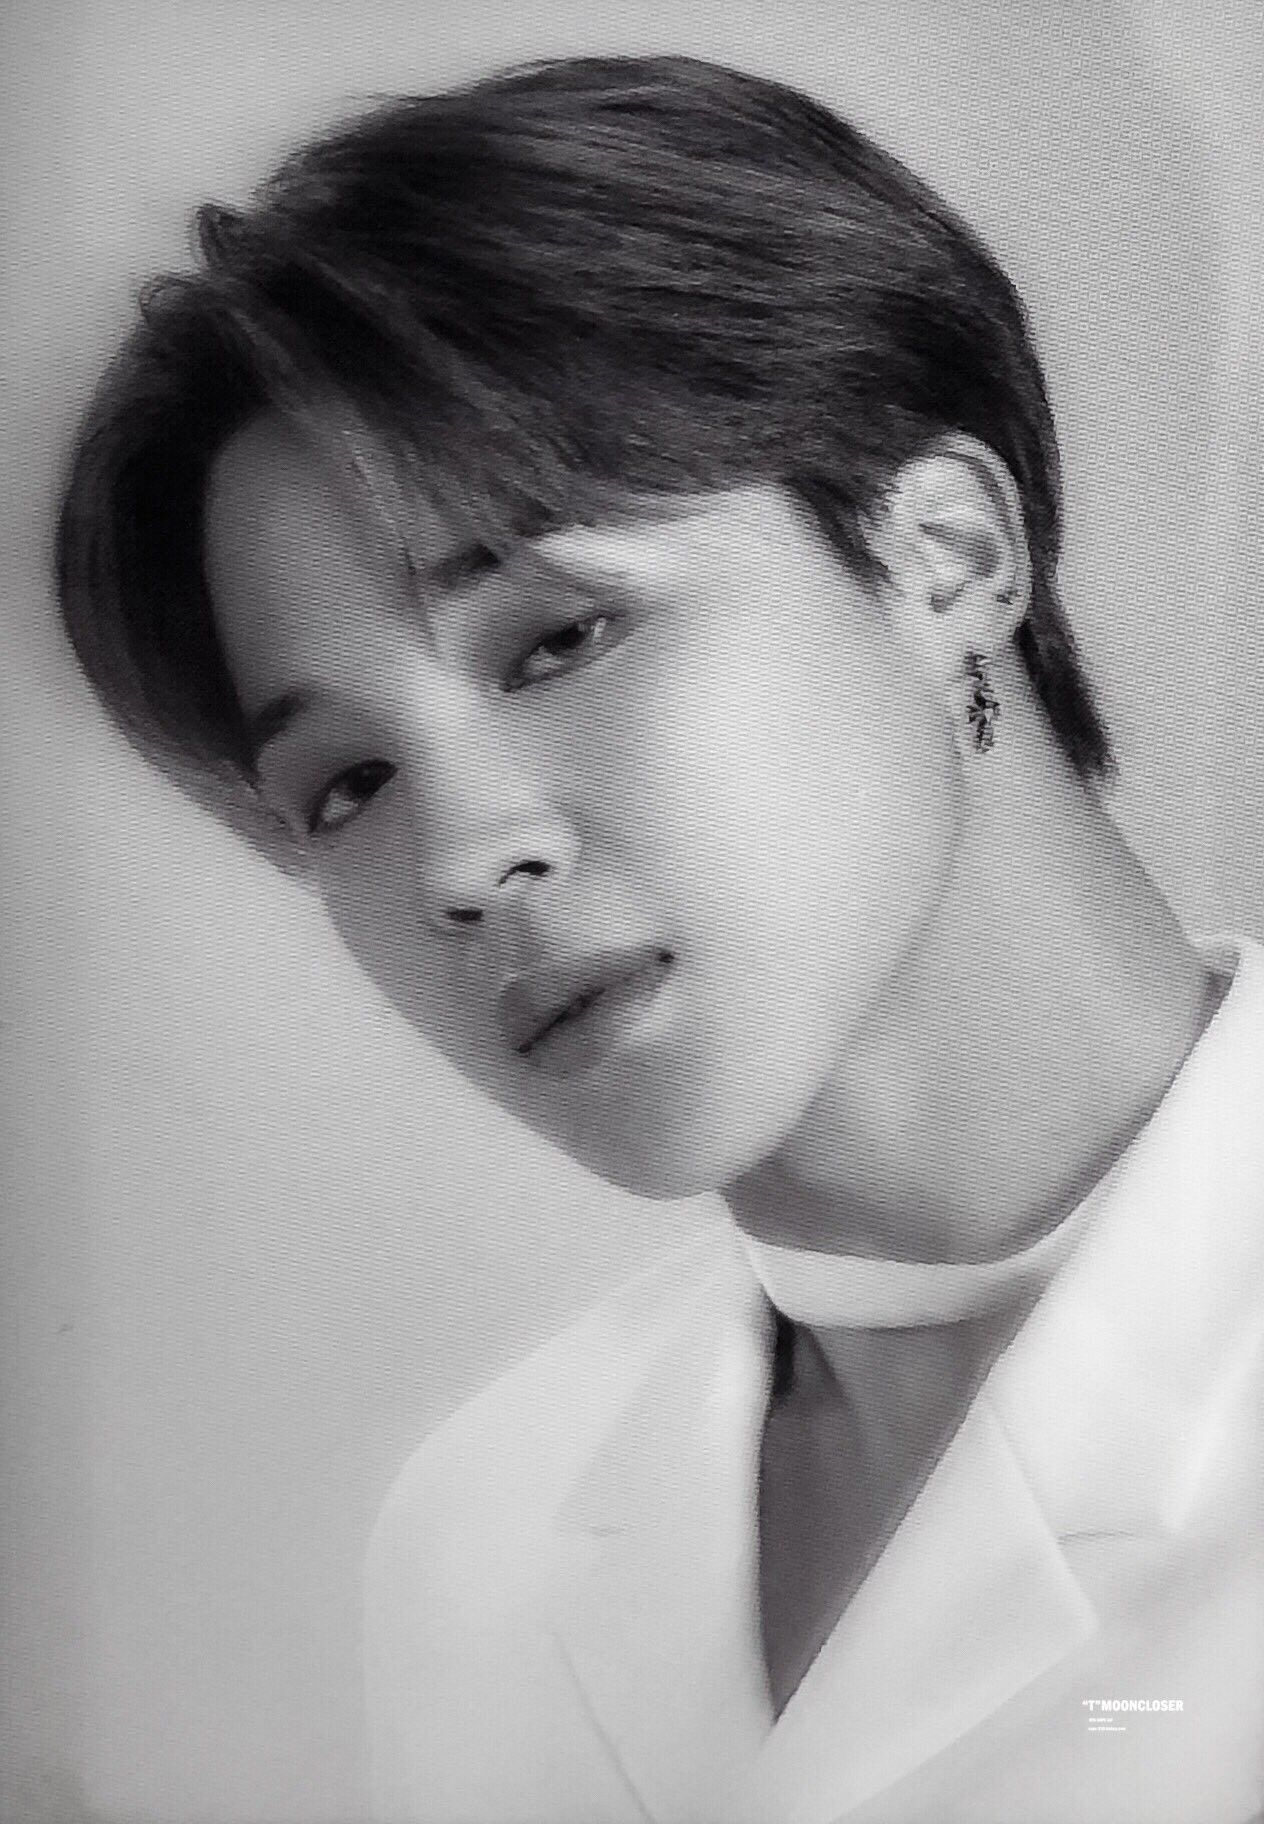 Bts Jimin Photo With Black And White Effect